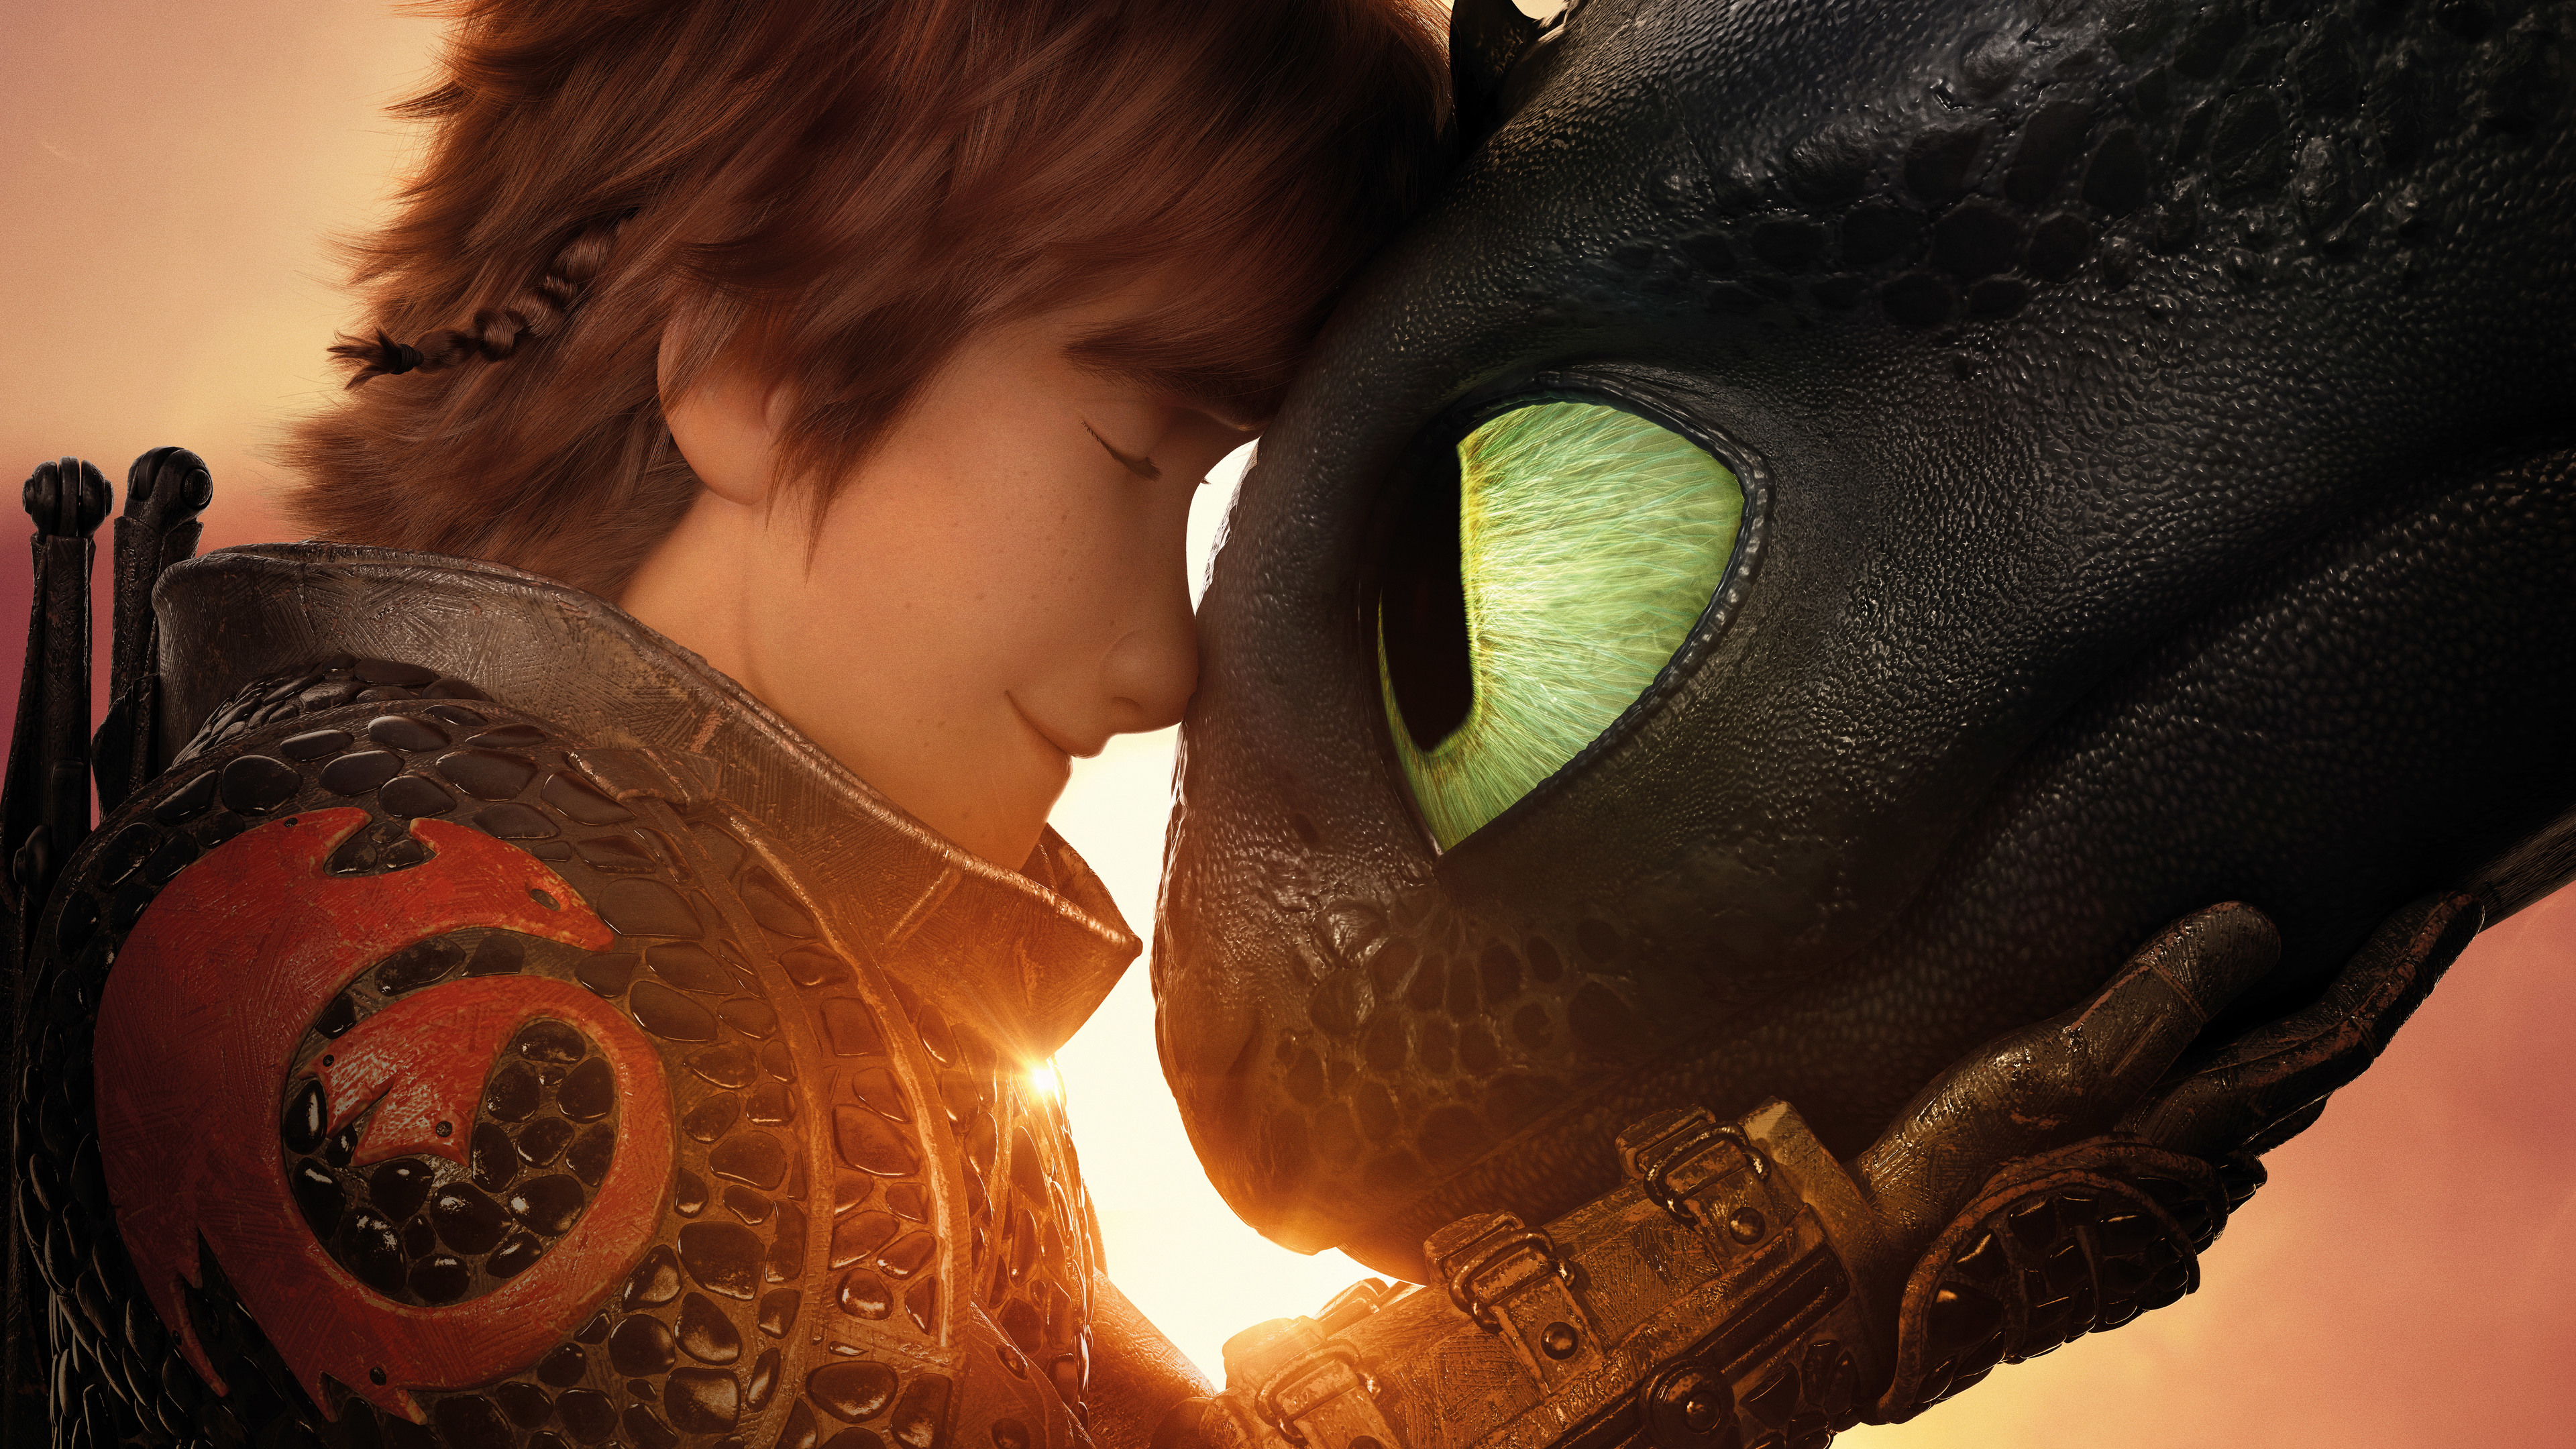 how to train your dragon the hidden world 8k 2019 1548528213 - How To Train Your Dragon The Hidden World 4k 2019 - movies wallpapers, how to train your dragon wallpapers, how to train your dragon the hidden world wallpapers, how to train your dragon 3 wallpapers, hd-wallpapers, dragon wallpapers, animated movies wallpapers, 8k wallpapers, 5k wallpapers, 4k-wallpapers, 2019 movies wallpapers